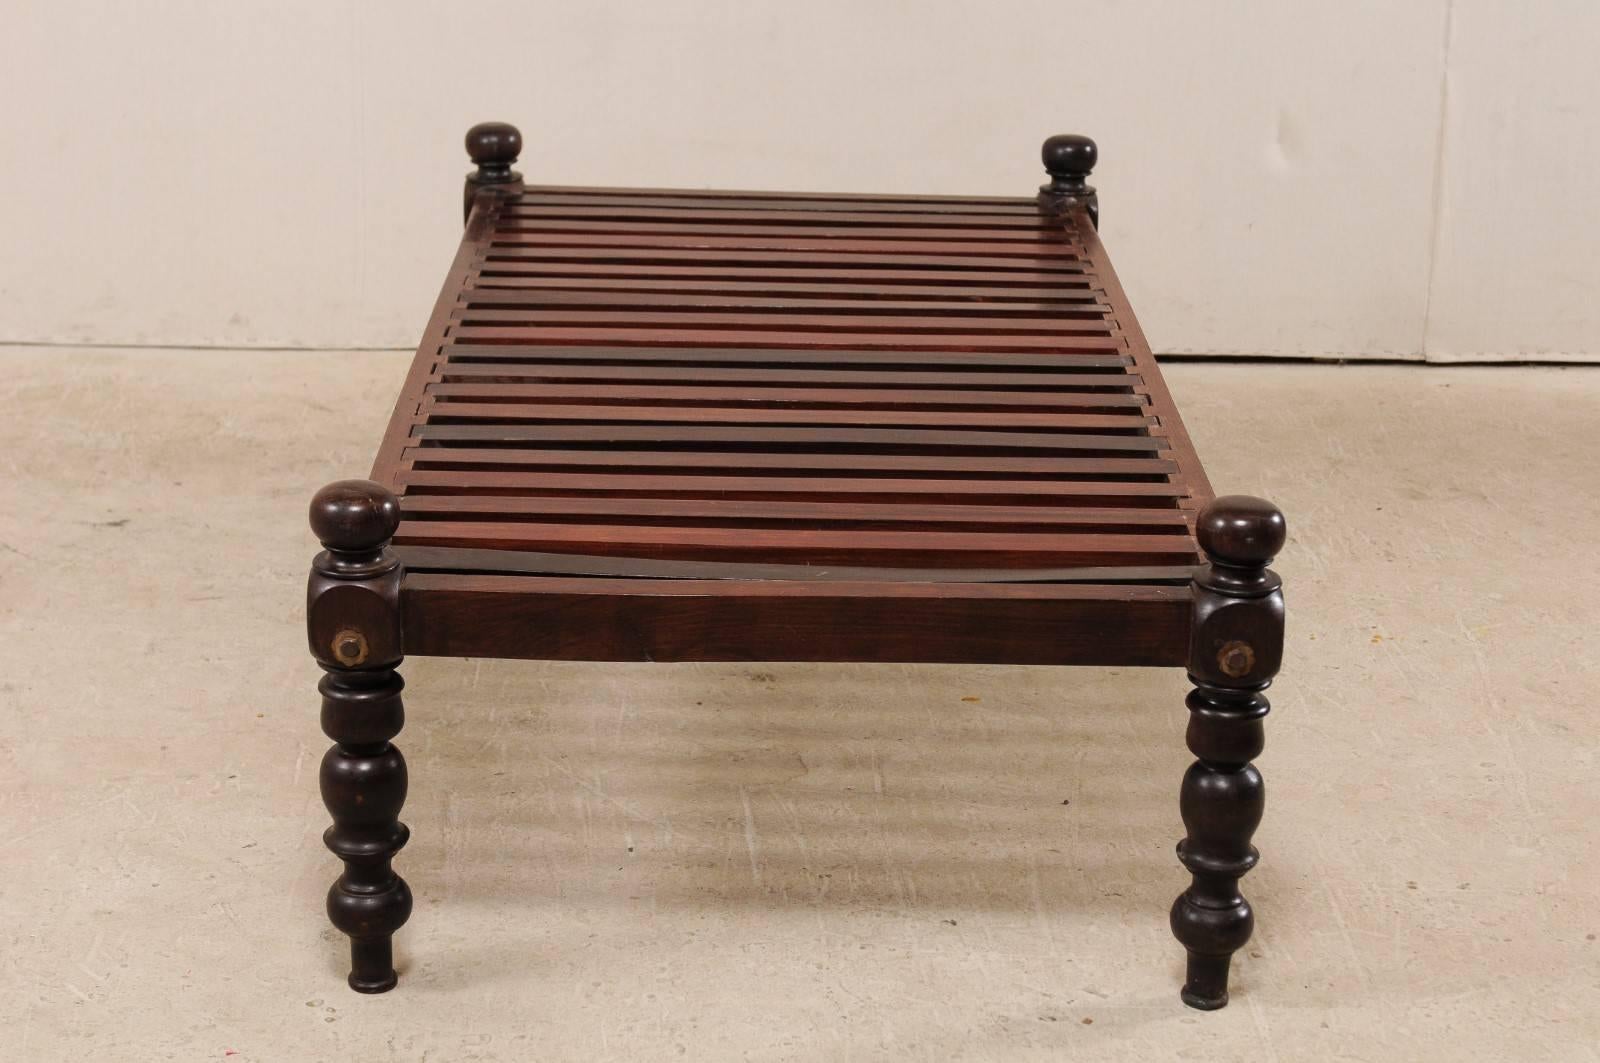 British Colonial Midcentury Slat Wood Daybed from India with Turned Legs 2